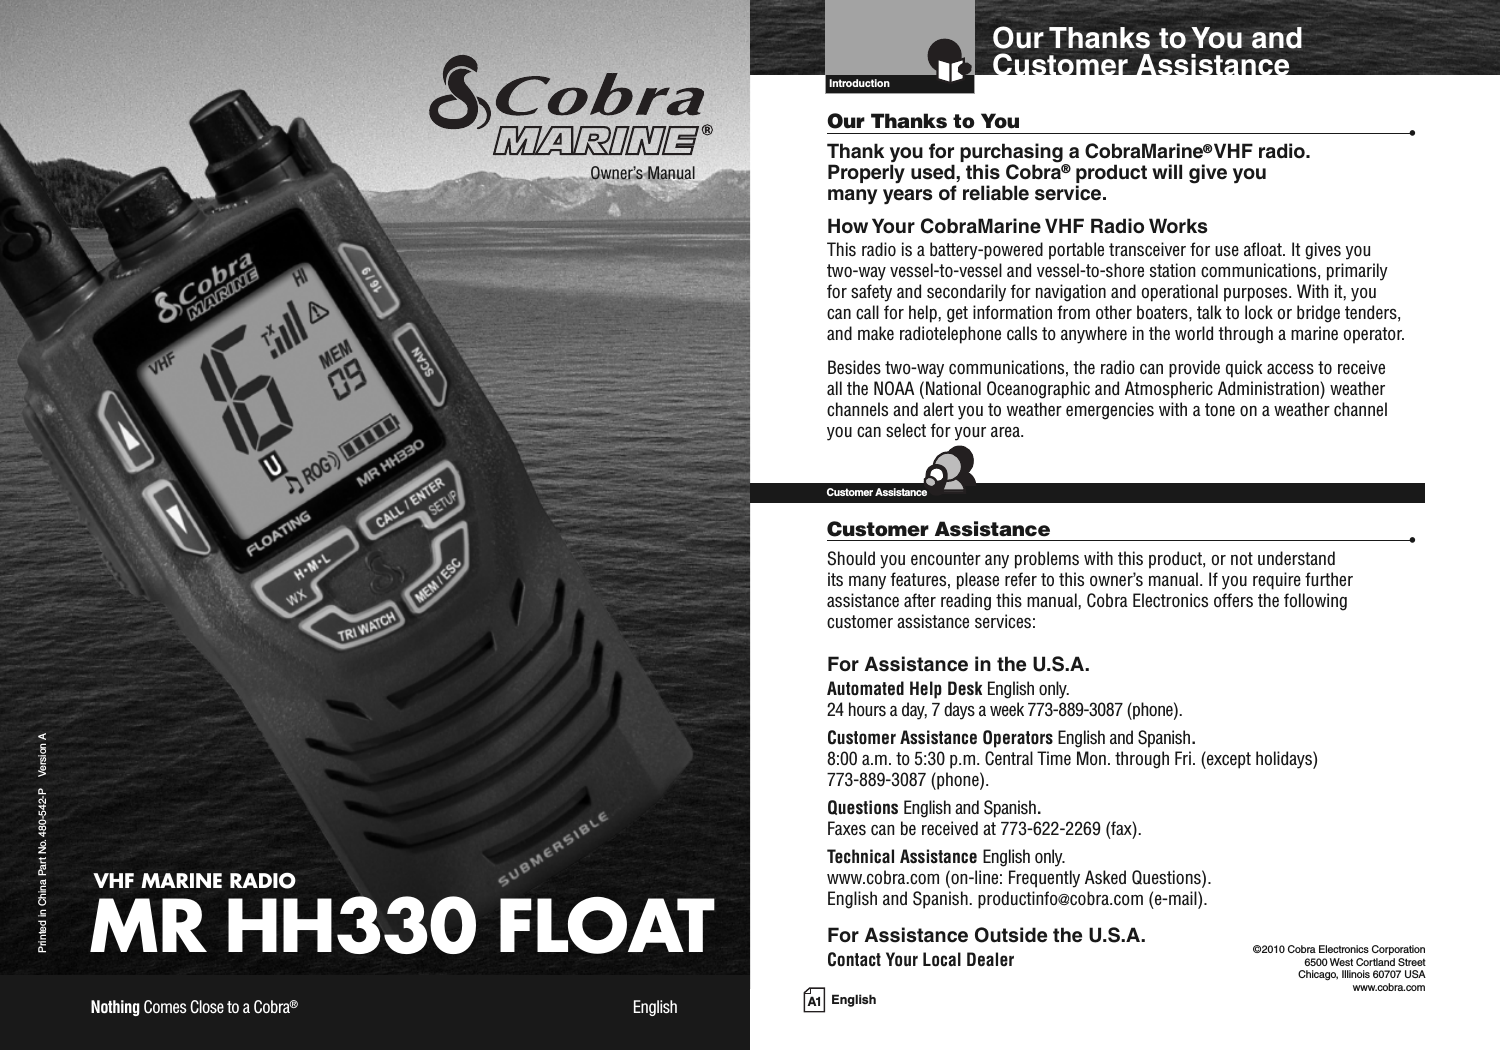 VHF MARINE RADIOMR HH330 FLOATPrinted in China Part No. 480-542-P Version AOwner’s ManualNothing Comes Close to a Cobra®English A1 EnglishOur Thanks to You andCustomer AssistanceIntroductionOur Thanks to You •Thank you for purchasing a CobraMarine®VHF radio.Properly used, this Cobra®product will give youmany years of reliable service.How Your CobraMarine VHF Radio WorksThis radio is a battery-powered portable transceiver for use afloat. It gives youtwo-way vessel-to-vessel and vessel-to-shore station communications, primarilyfor safety and secondarily for navigation and operational purposes. With it, youcan call for help, get information from other boaters, talk to lock or bridge tenders,and make radiotelephone calls to anywhere in the world through a marine operator.Besides two-way communications, the radio can provide quick access to receiveall the NOAA (National Oceanographic and Atmospheric Administration) weatherchannels and alert you to weather emergencies with a tone on a weather channelyou can select for your area.Customer Assistance •Should you encounter any problems with this product, or not understandits many features, please refer to this owner’s manual. If you require furtherassistance after reading this manual, Cobra Electronics offers the followingcustomer assistance services:For Assistance in the U.S.A.Automated Help Desk English only.24 hours a day, 7 days a week 773-889-3087 (phone).Customer Assistance Operators English and Spanish.8:00 a.m. to 5:30 p.m. Central Time Mon. through Fri. (except holidays)773-889-3087 (phone).Questions English and Spanish.Faxes can be received at 773-622-2269 (fax).Technical Assistance English only.www.cobra.com (on-line: Frequently Asked Questions).English and Spanish. productinfo@cobra.com (e-mail).For Assistance Outside the U.S.A.Contact Your Local DealerCustomer Assistance©2010 Cobra Electronics Corporation6500 West Cortland StreetChicago, Illinois 60707 USAwww.cobra.com